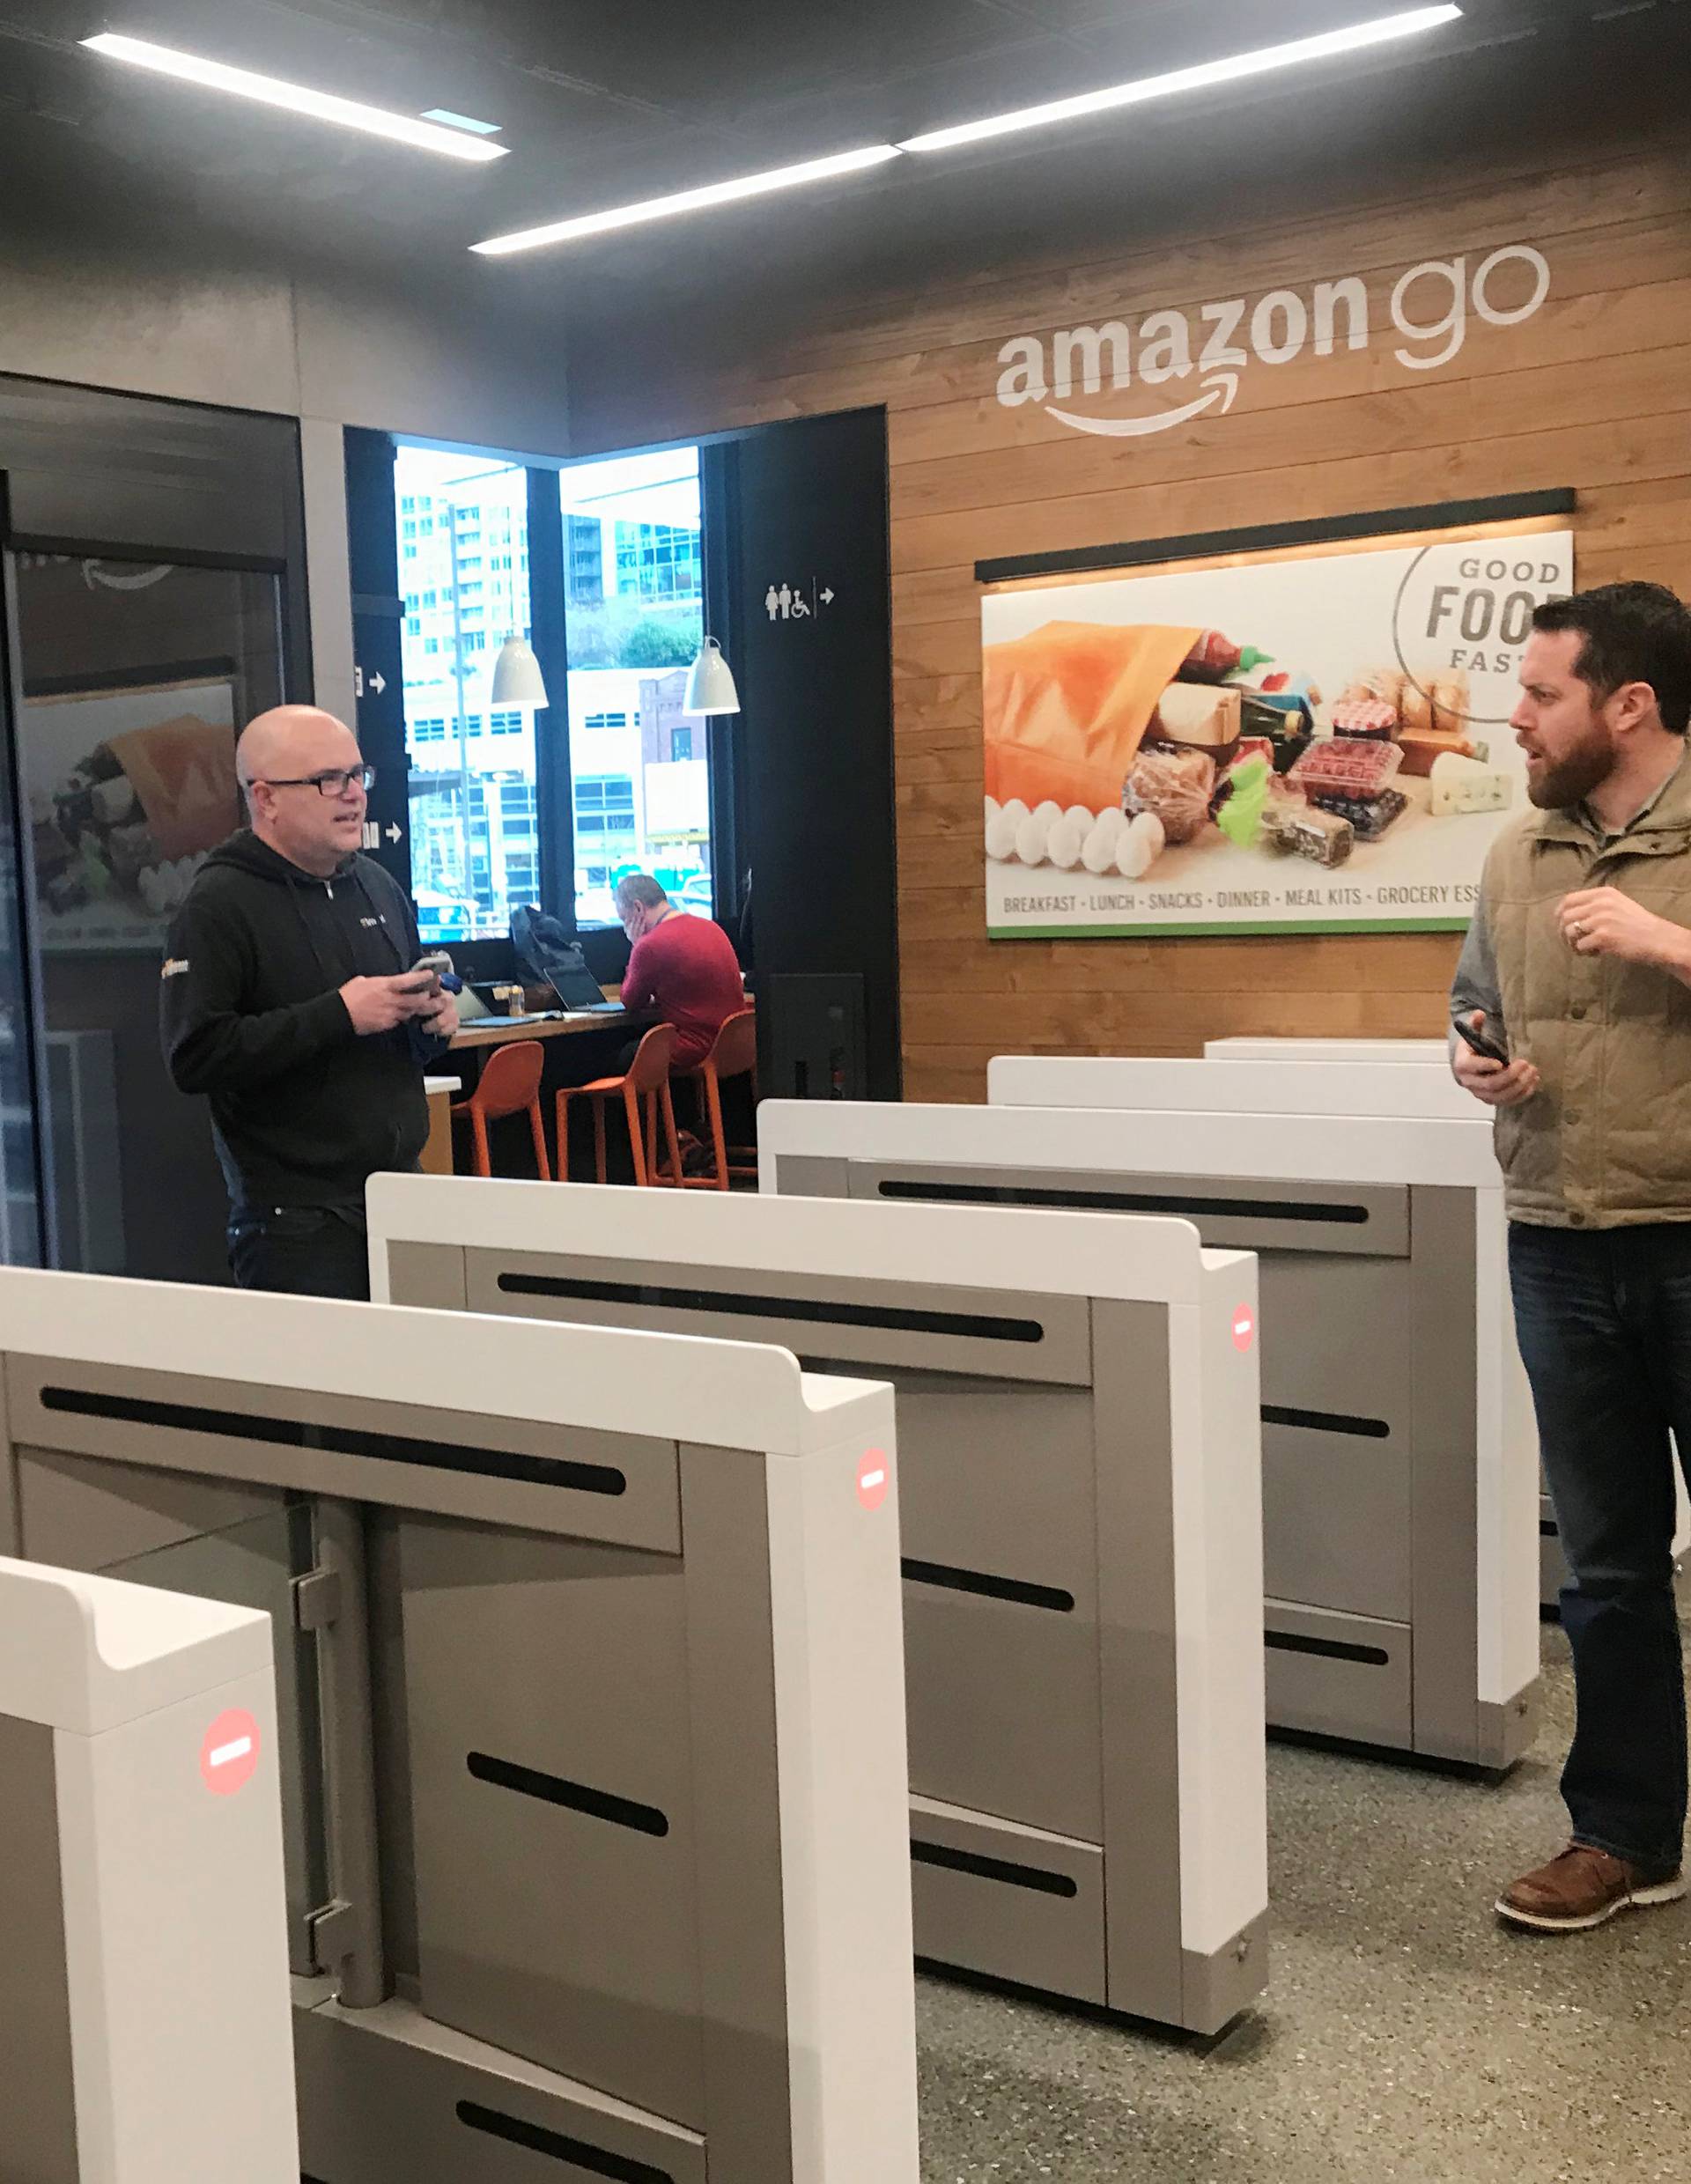 Shoppers enter the Amazon Go store located in Amazon's "Day 1" office building in Seattle